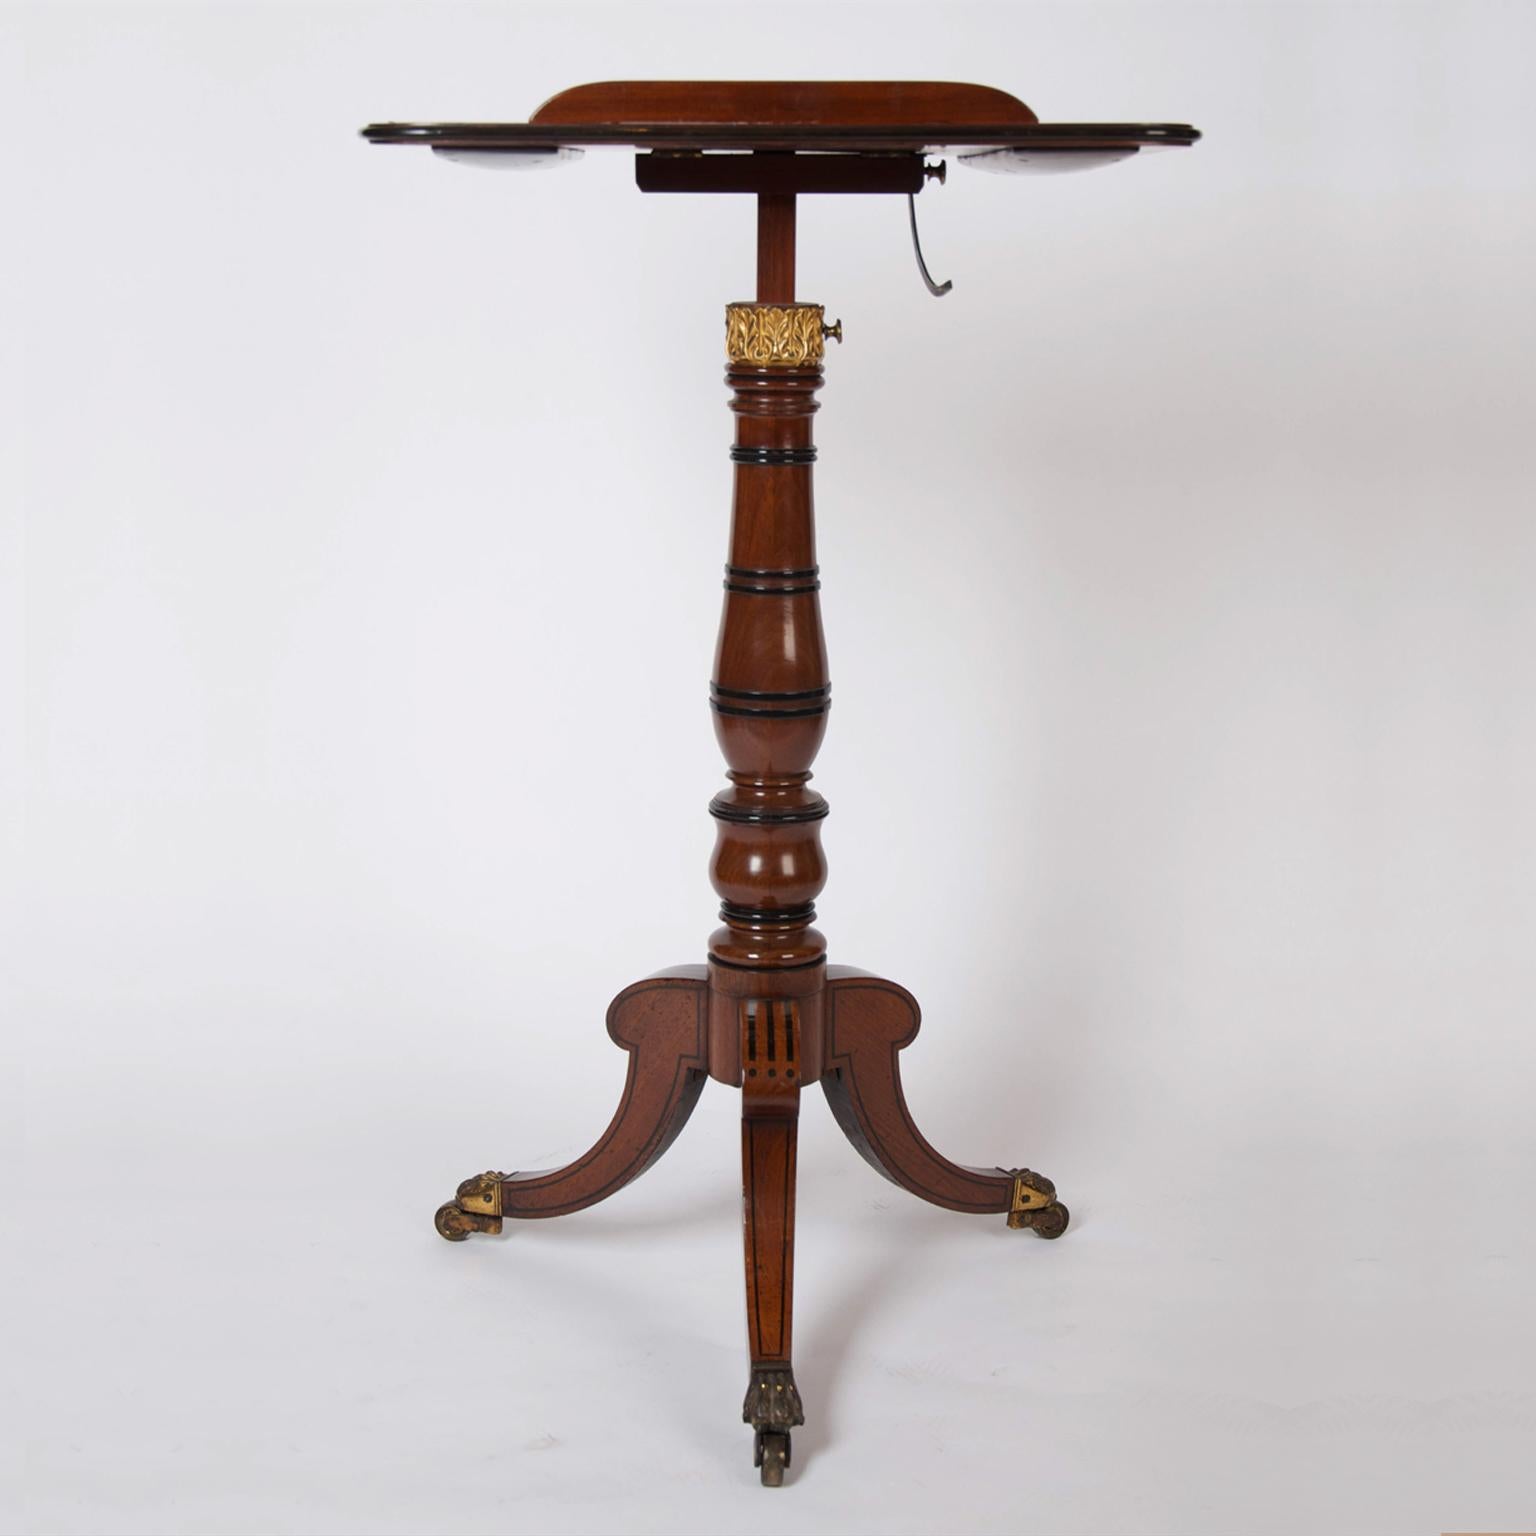 Rare English Regency Period Mahogany Adjustable Reading Table, circa 1820 In Good Condition For Sale In Brighton, West Sussex